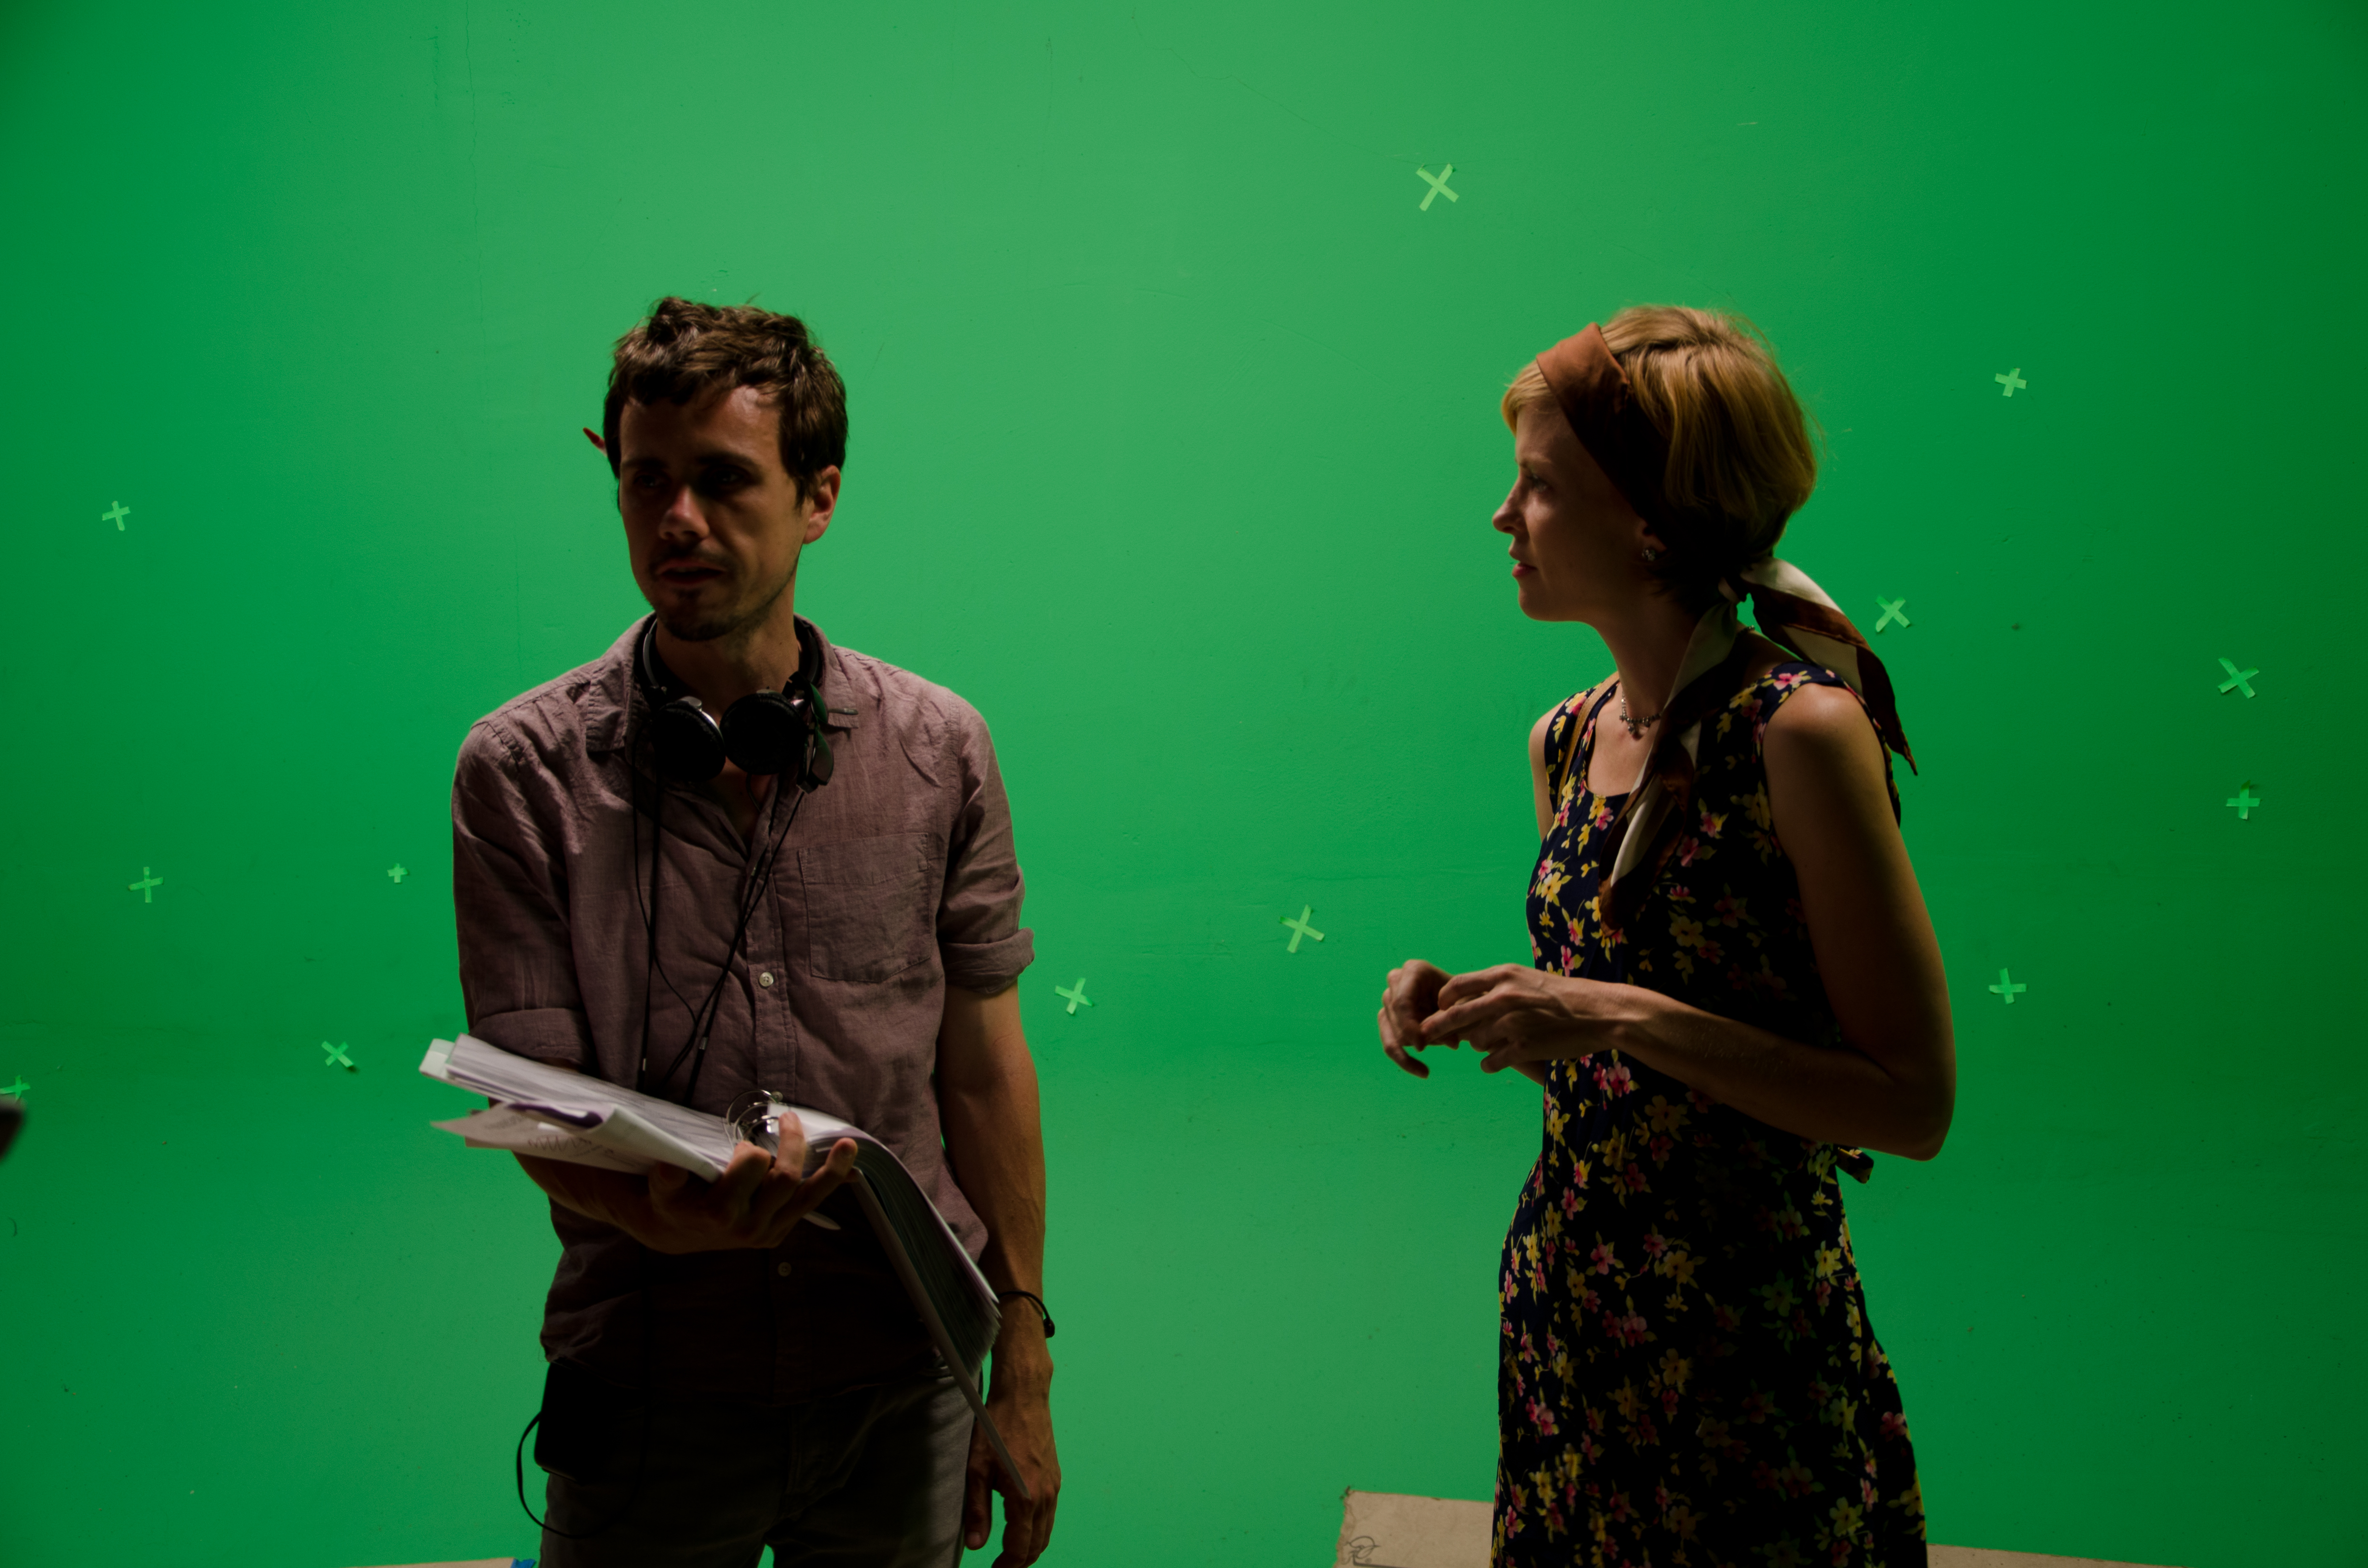 Behind the scenes of The Toy Soldiers. August 2013.